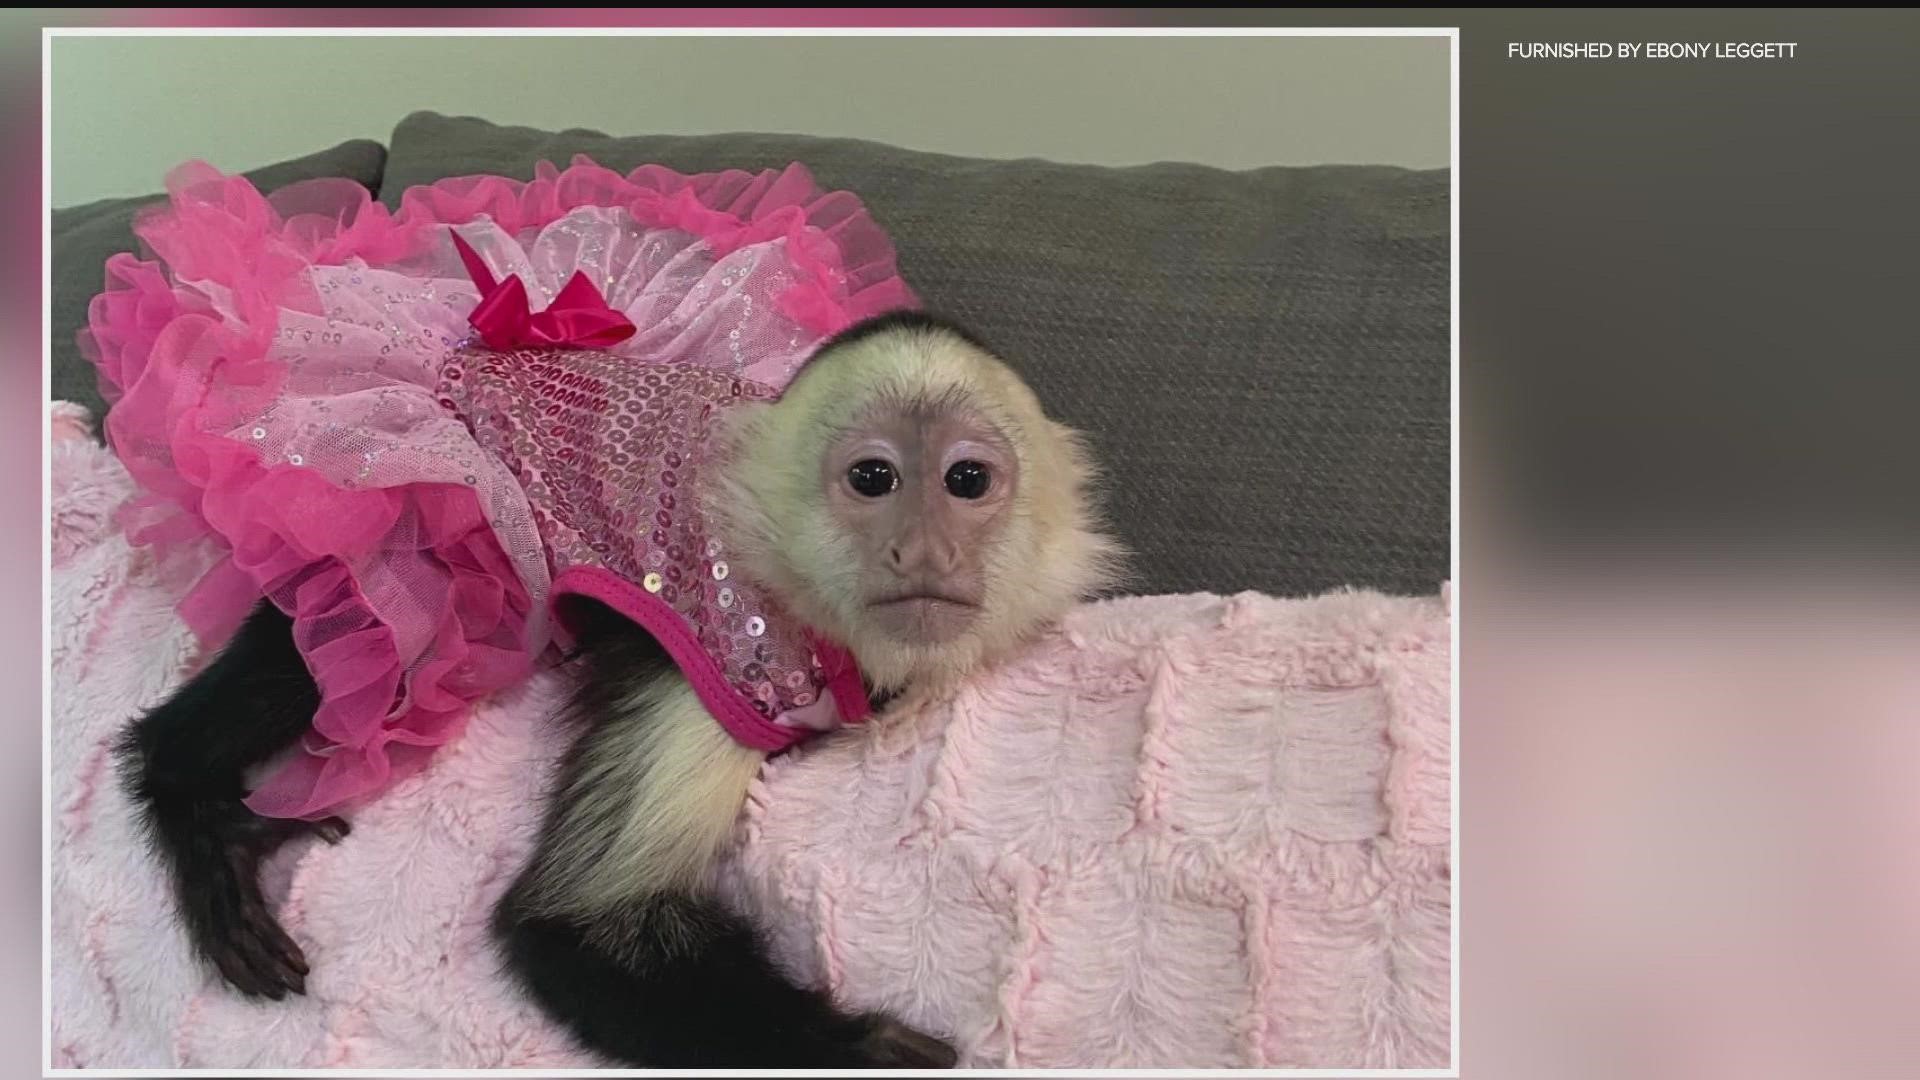 Maplewood Police say the victim left a capuchin monkey named Coco Chanel inside her vehicle, and when she returned, the monkey and pink carrier were missing.